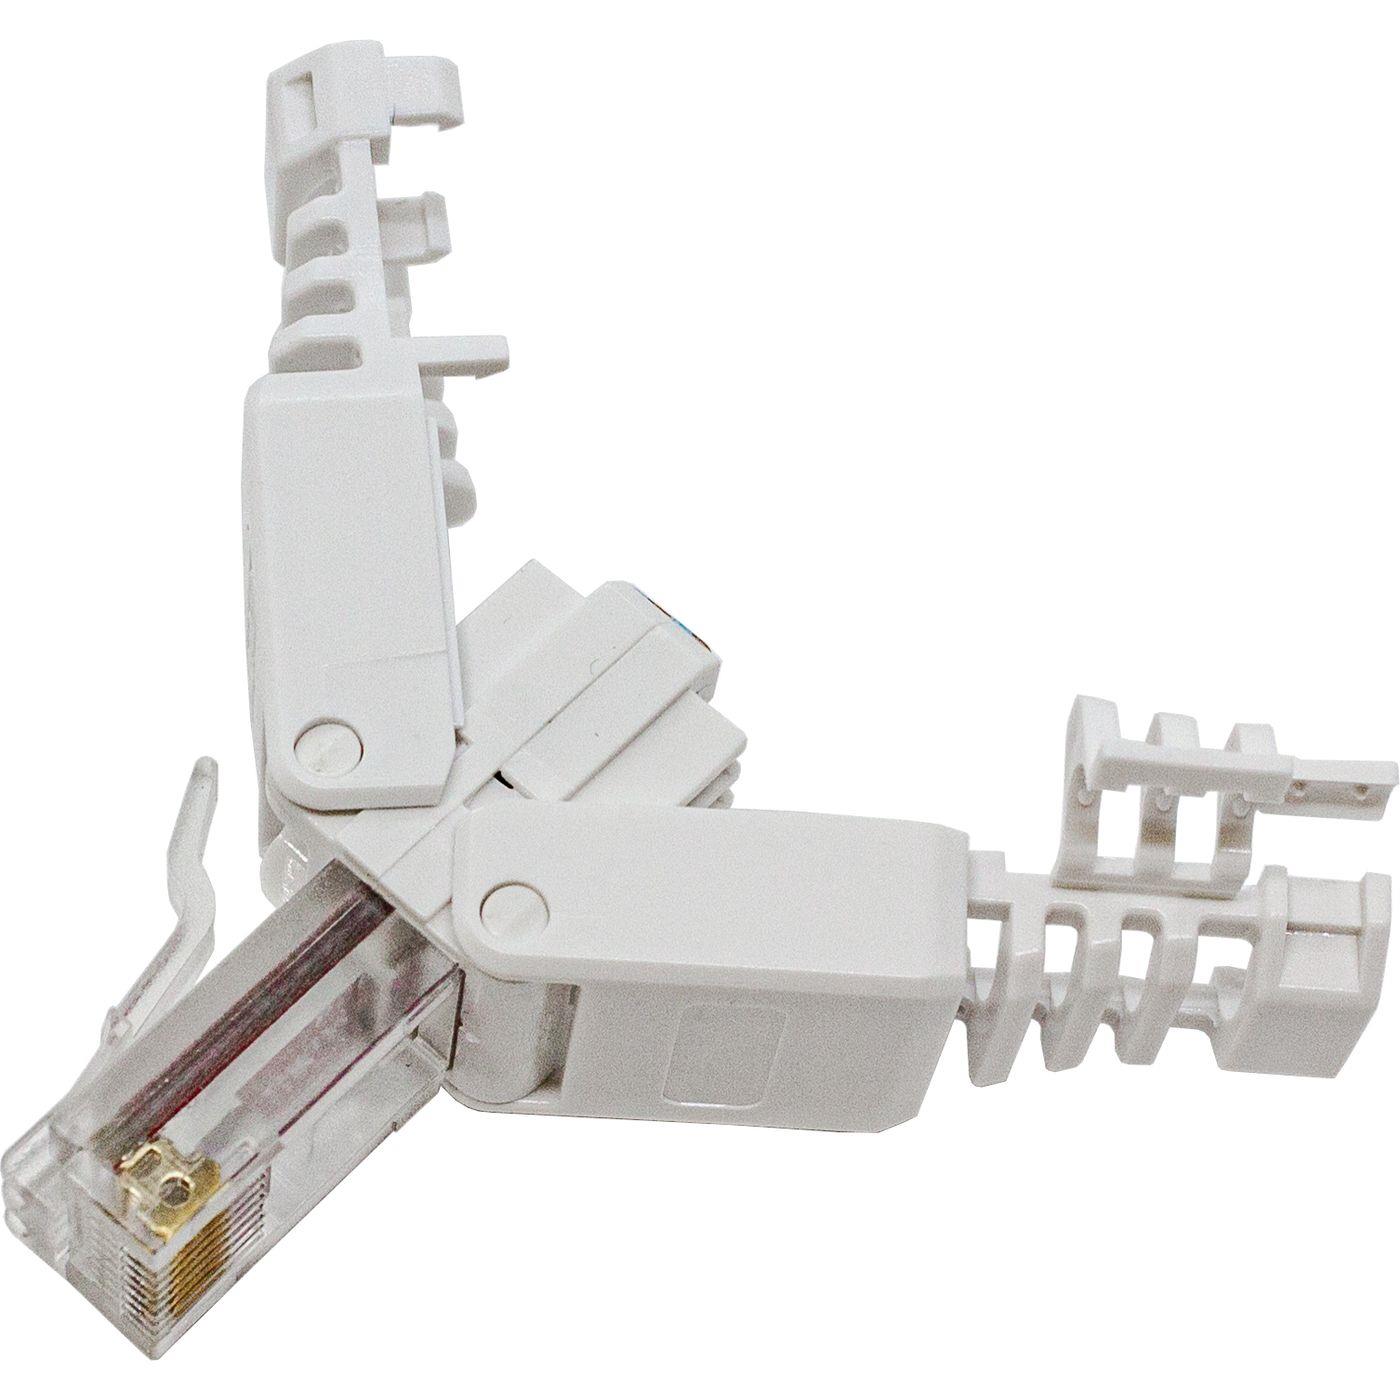 Network connector toolless RJ45 Plug CAT5 CAT6 LAN gold plated contacts Cat 6 Without tool Patch Cable